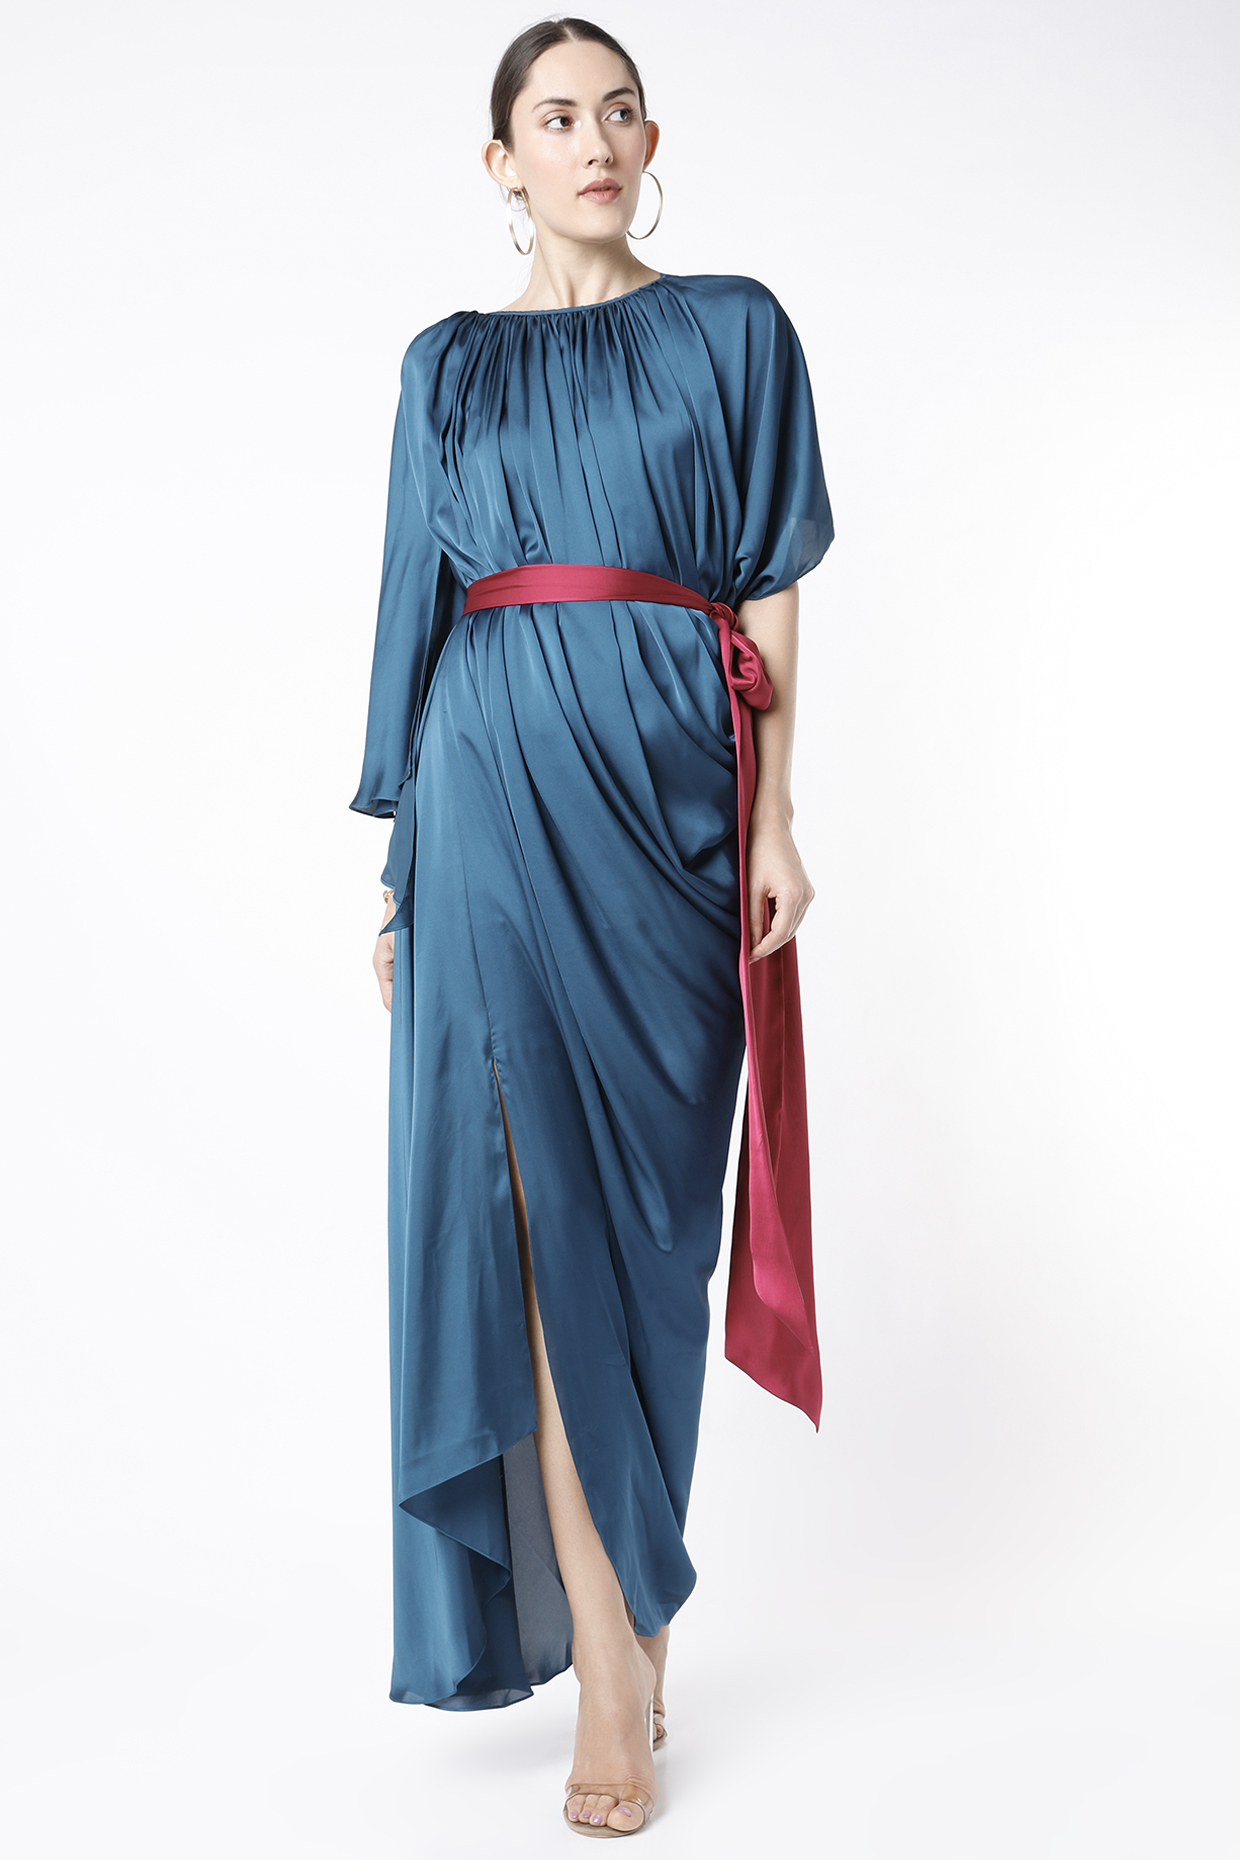 Teal Blue Draped Gown With Contrasting Sash